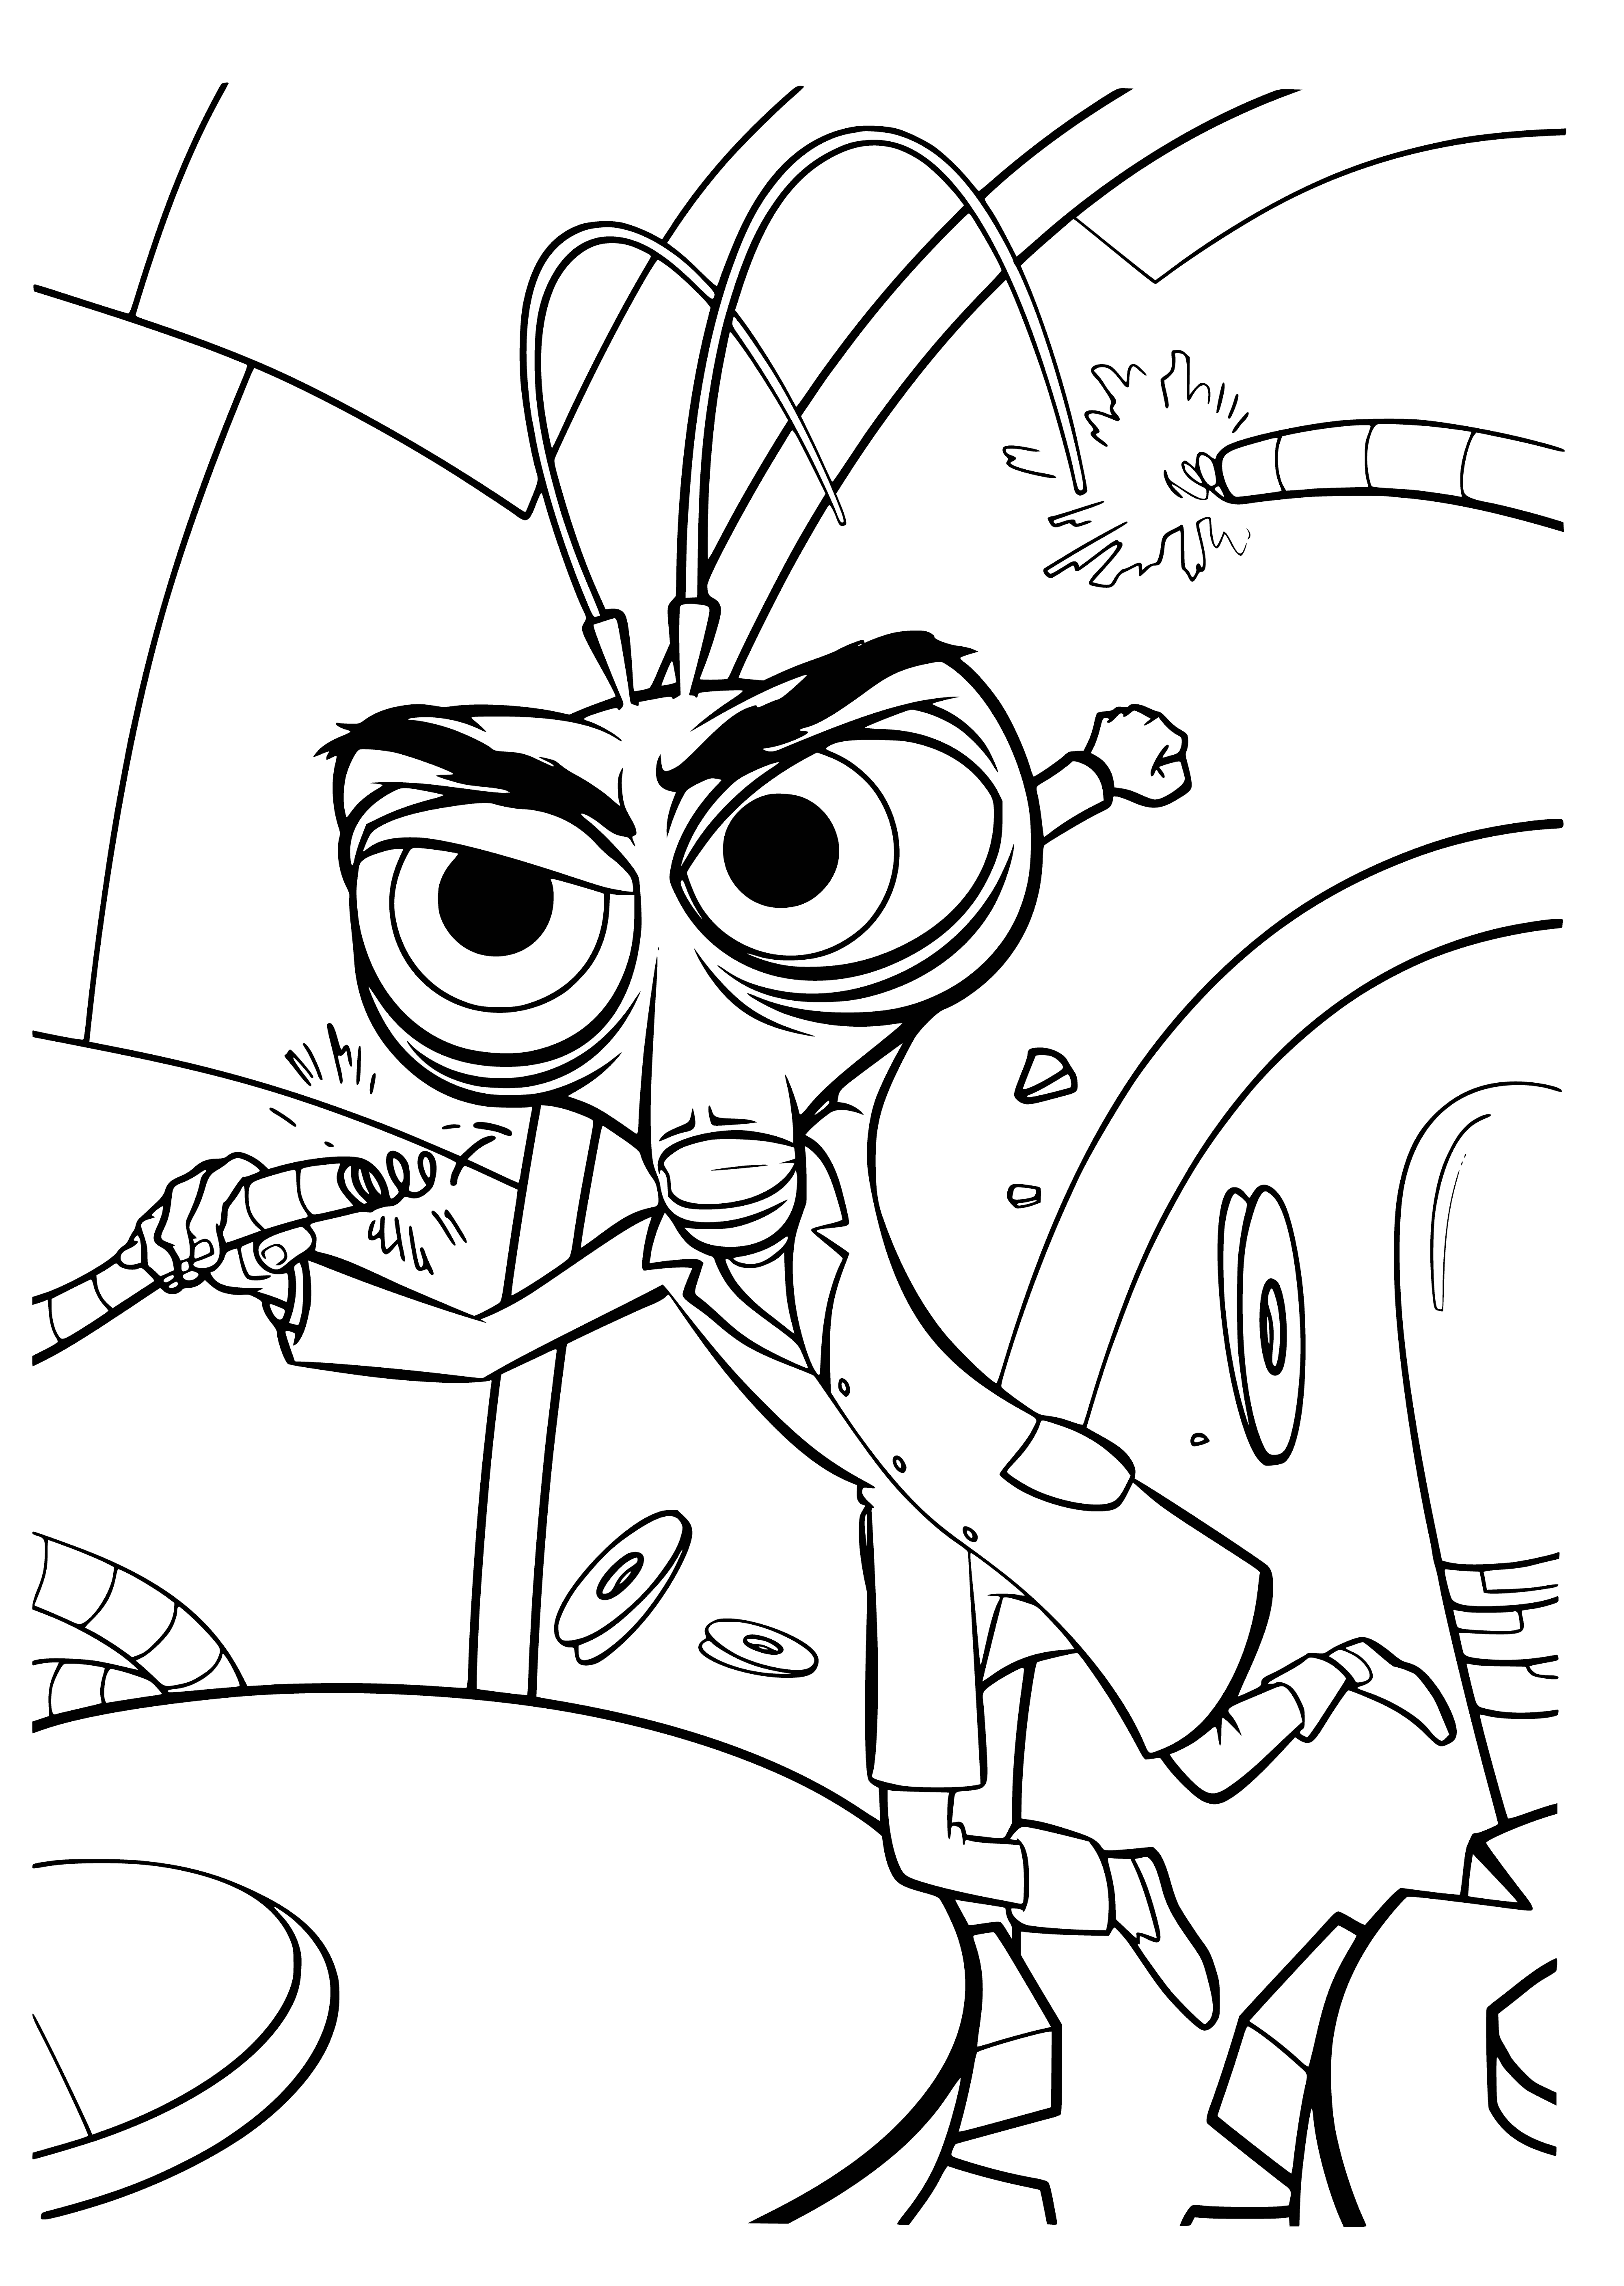 coloring page: Cockroach in lab coat & glasses stands in front of poster reading "Monsters vs Aliens," holding a beaker & remote.